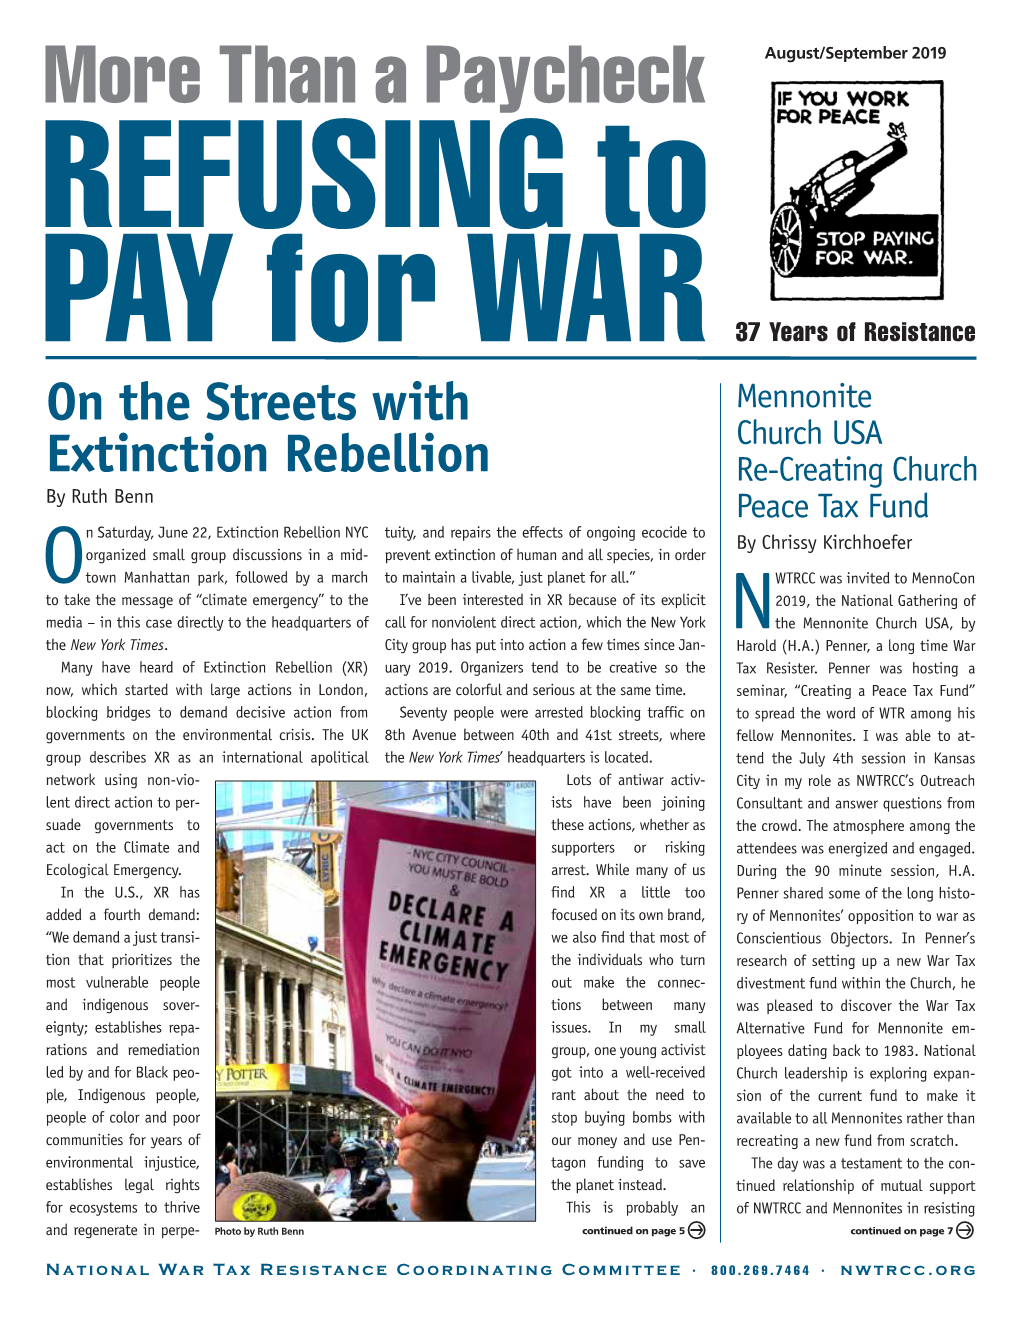 On the Streets with Extinction Rebellion